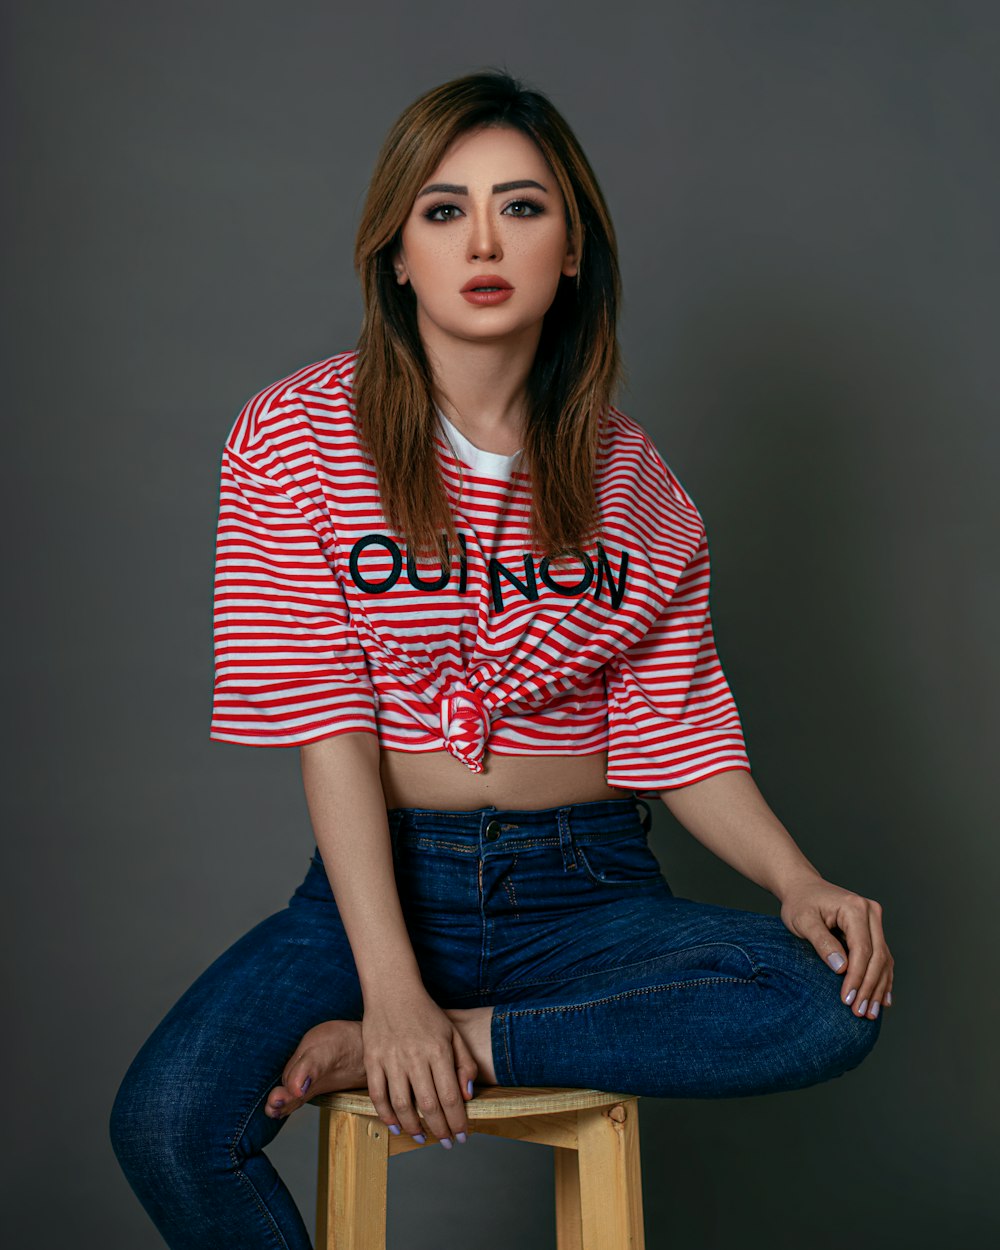 woman in red and white striped shirt and blue denim jeans sitting on gray chair